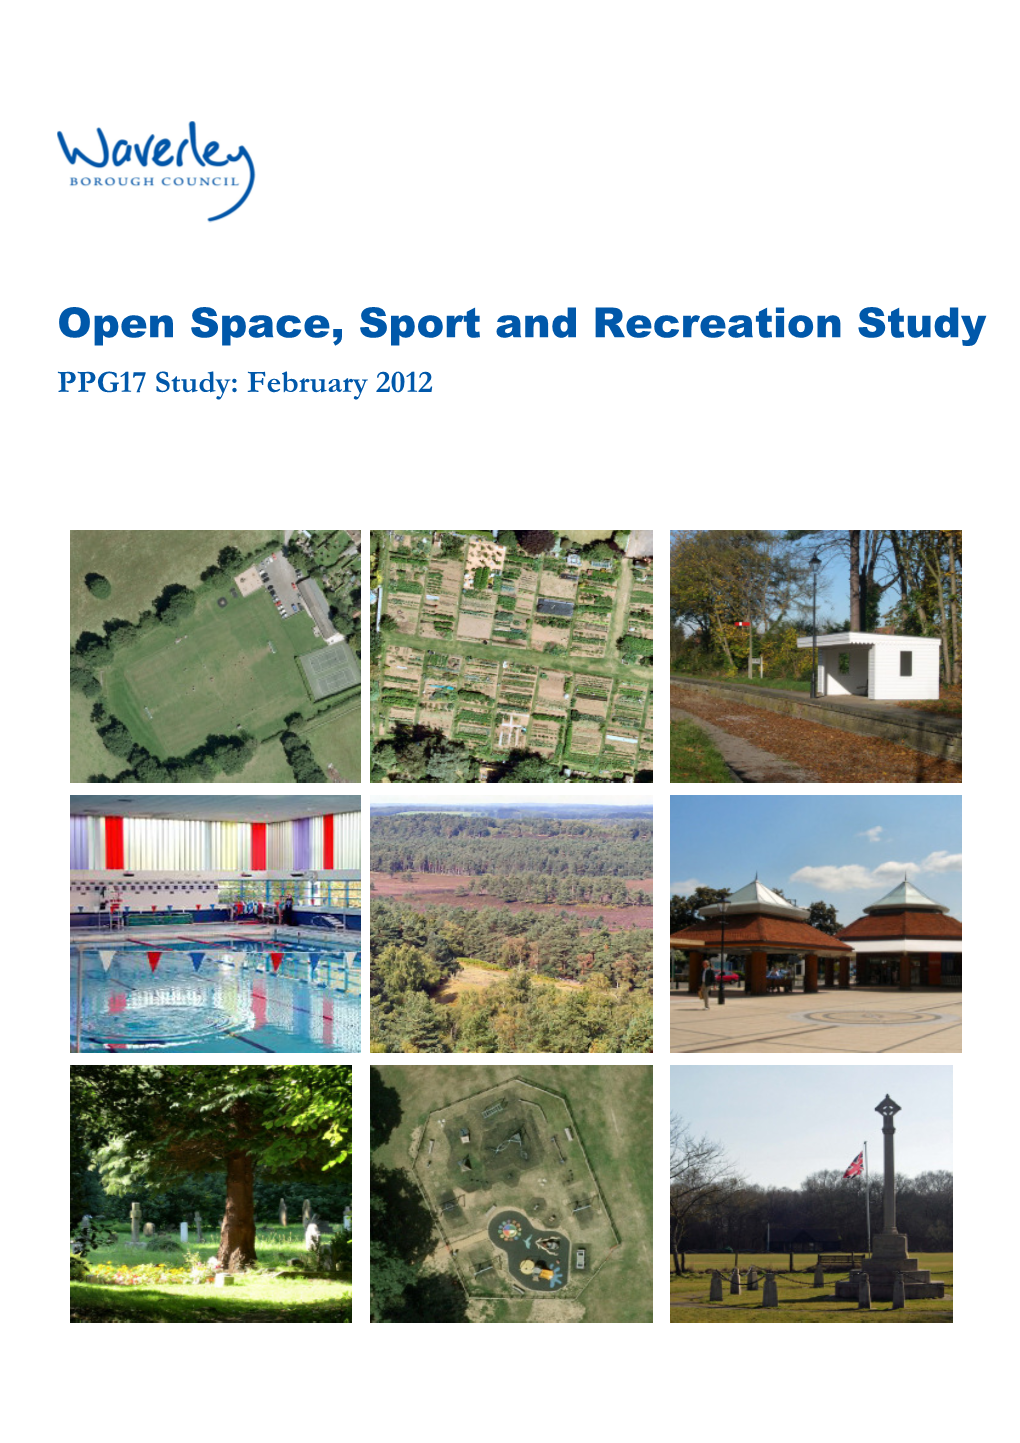 Open Space, Sport and Recreation (PPG17) Study